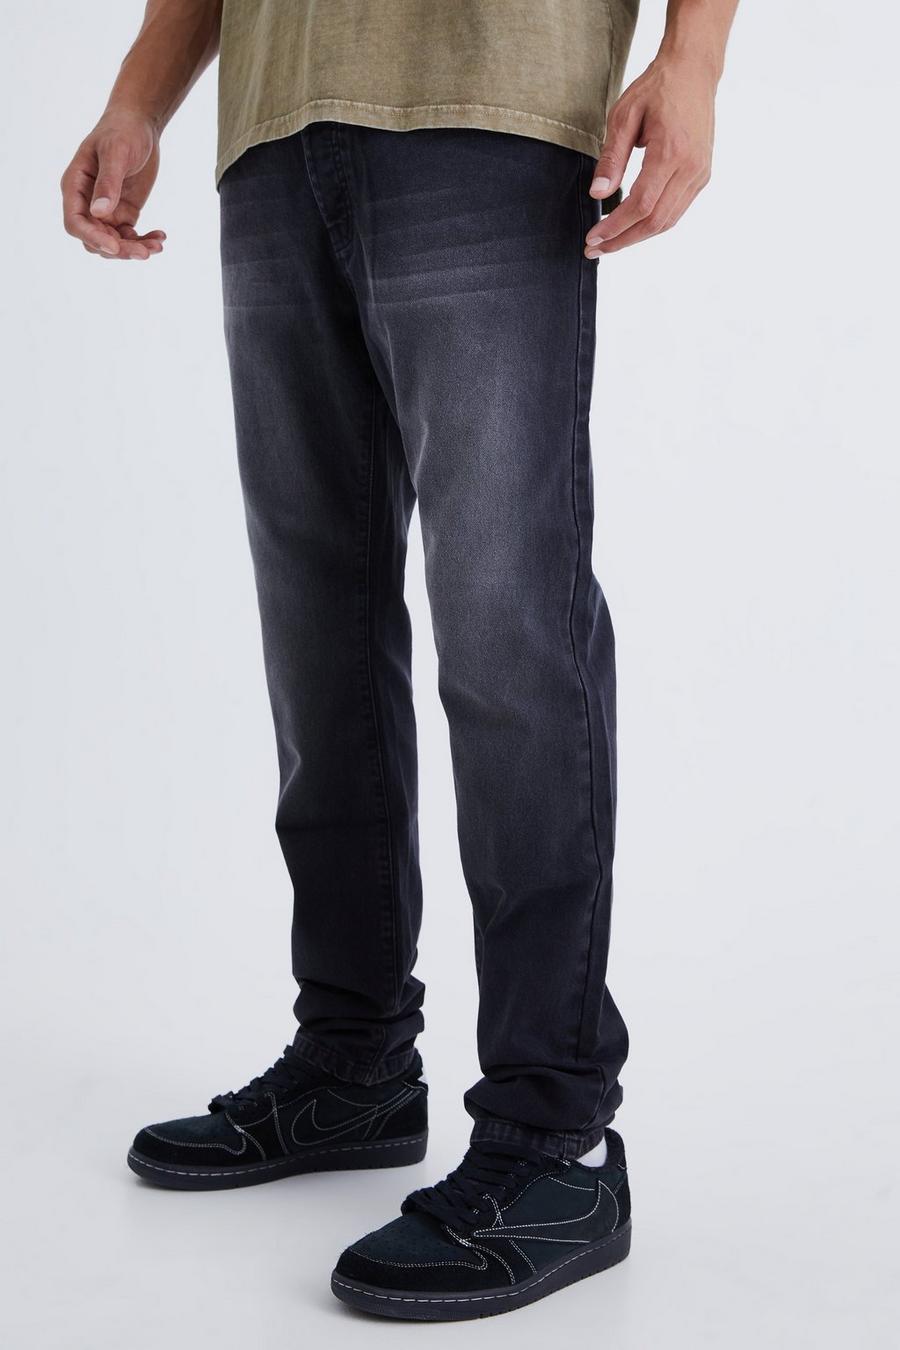 Jeans Tall Slim Fit in denim rigido, Washed black image number 1